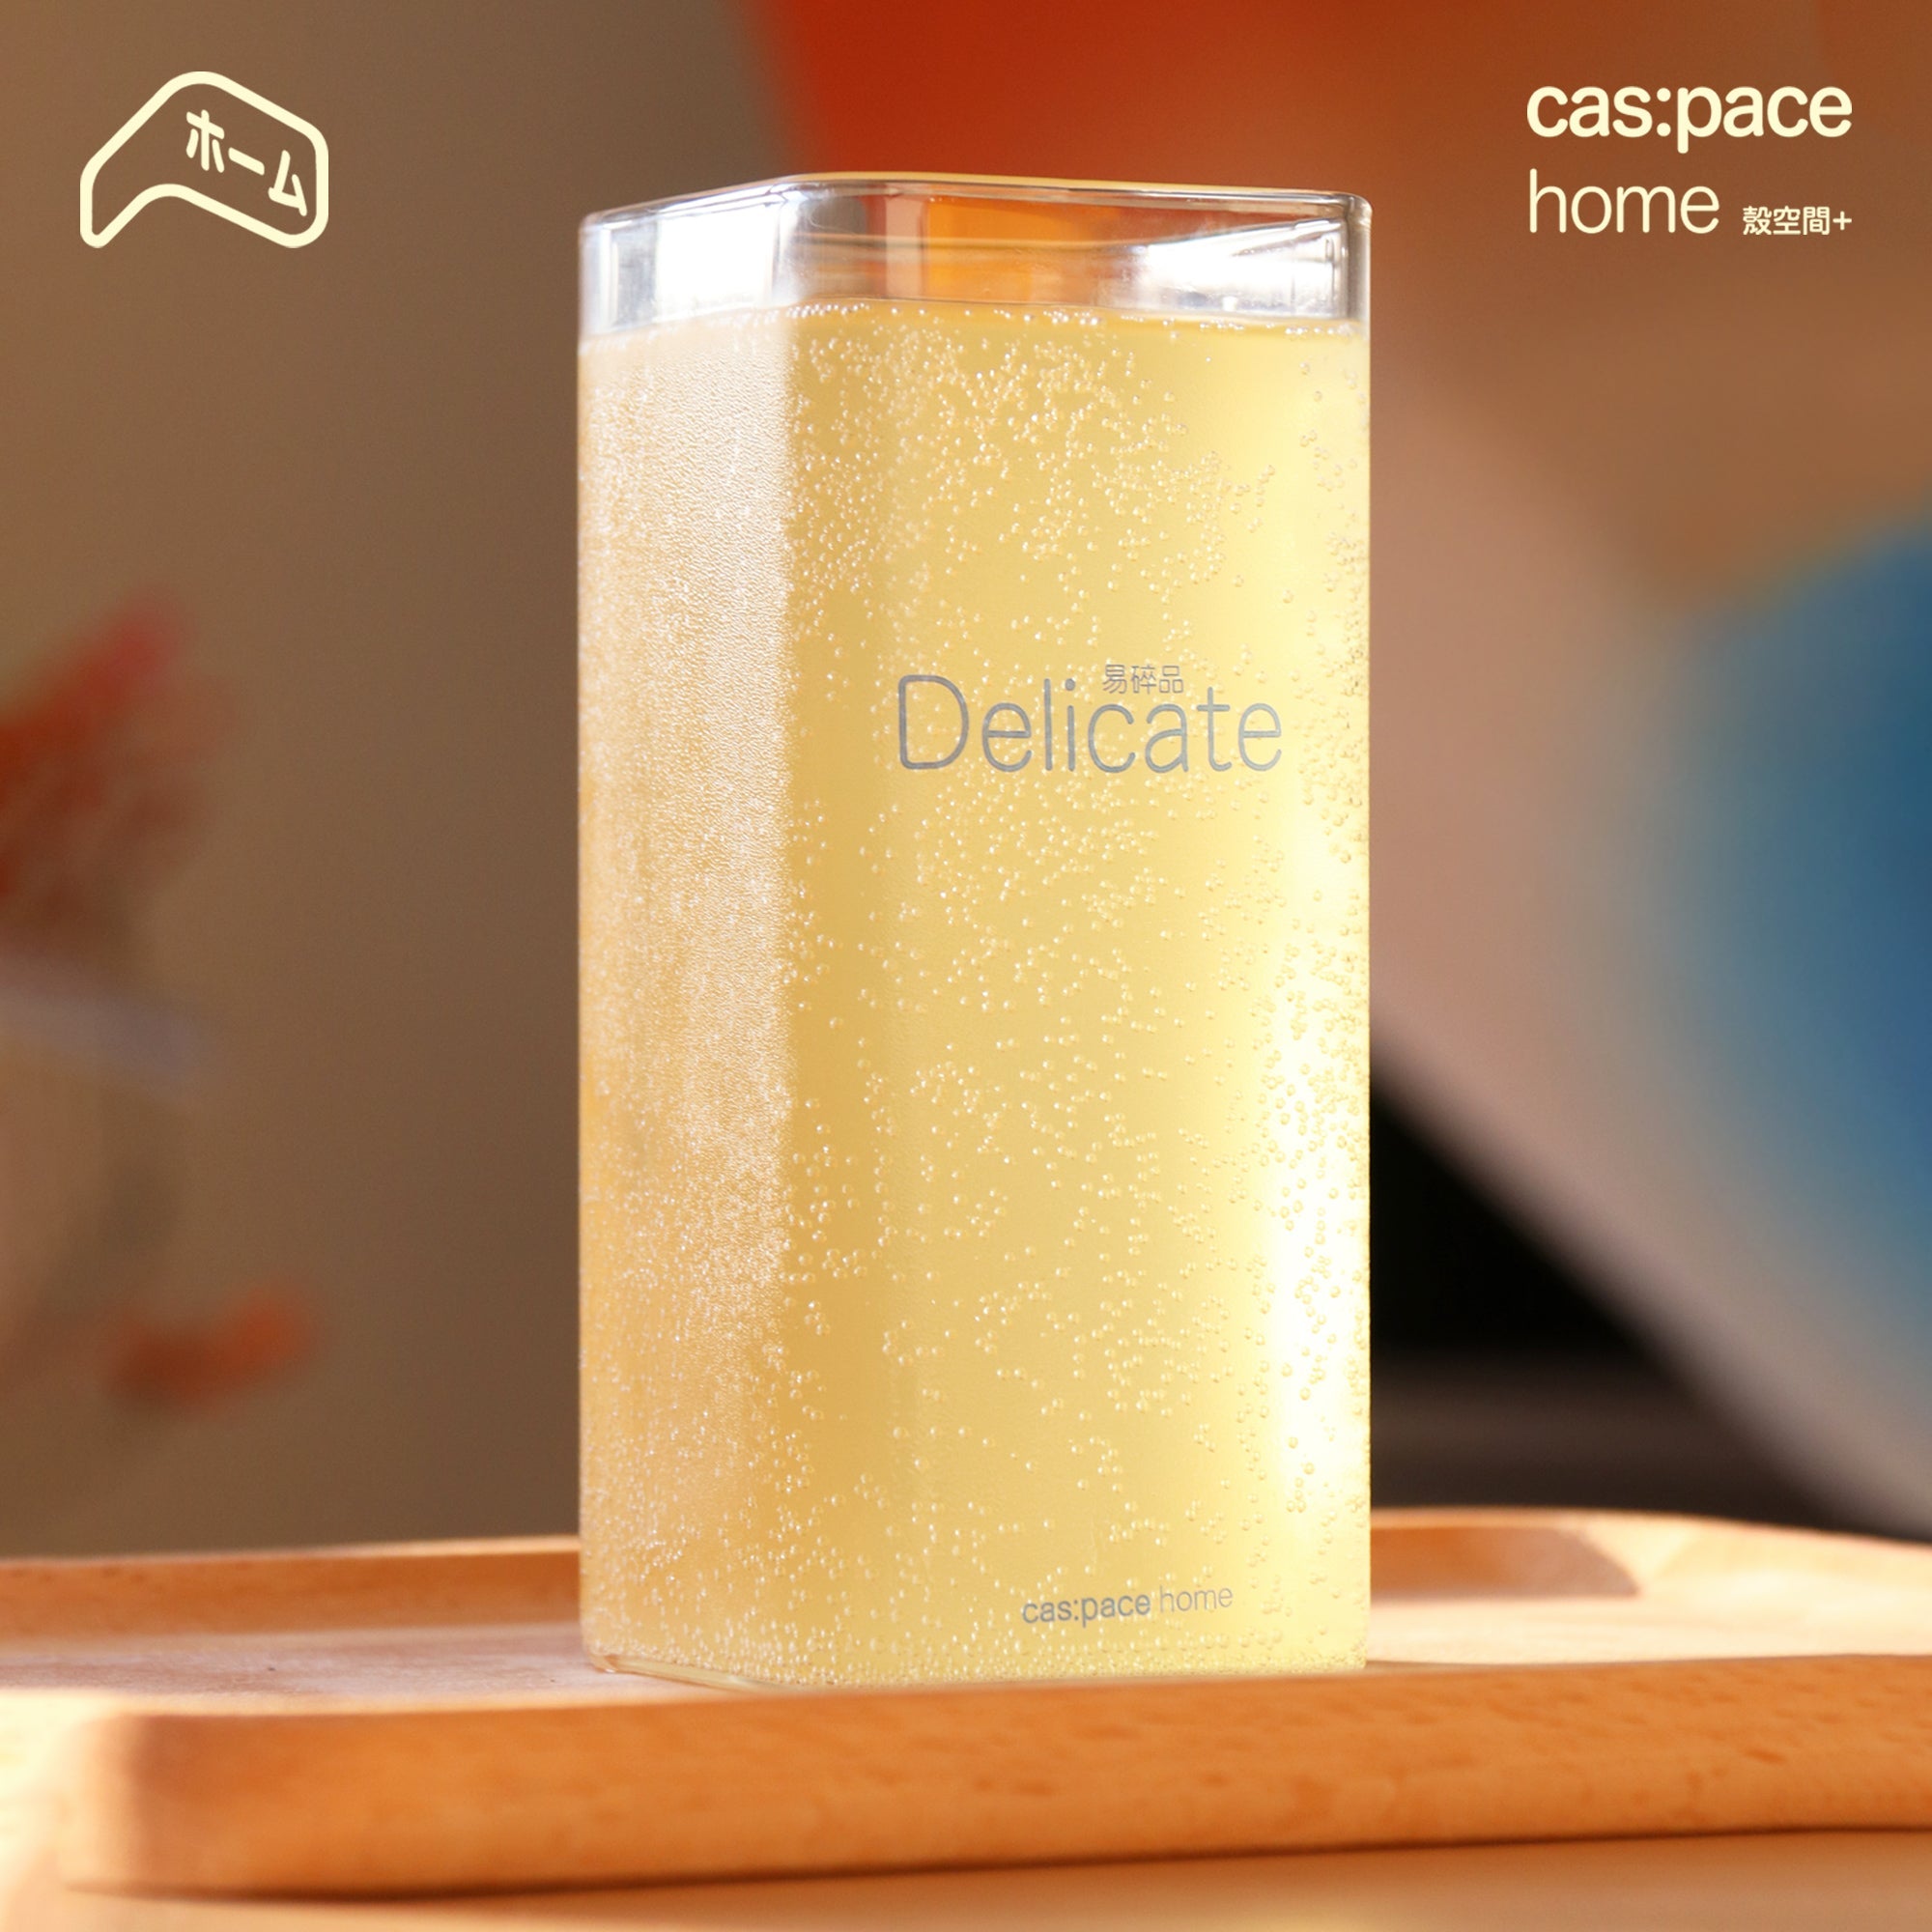 cas:pace home「Delicate」カップ - cas:pace 殼空間